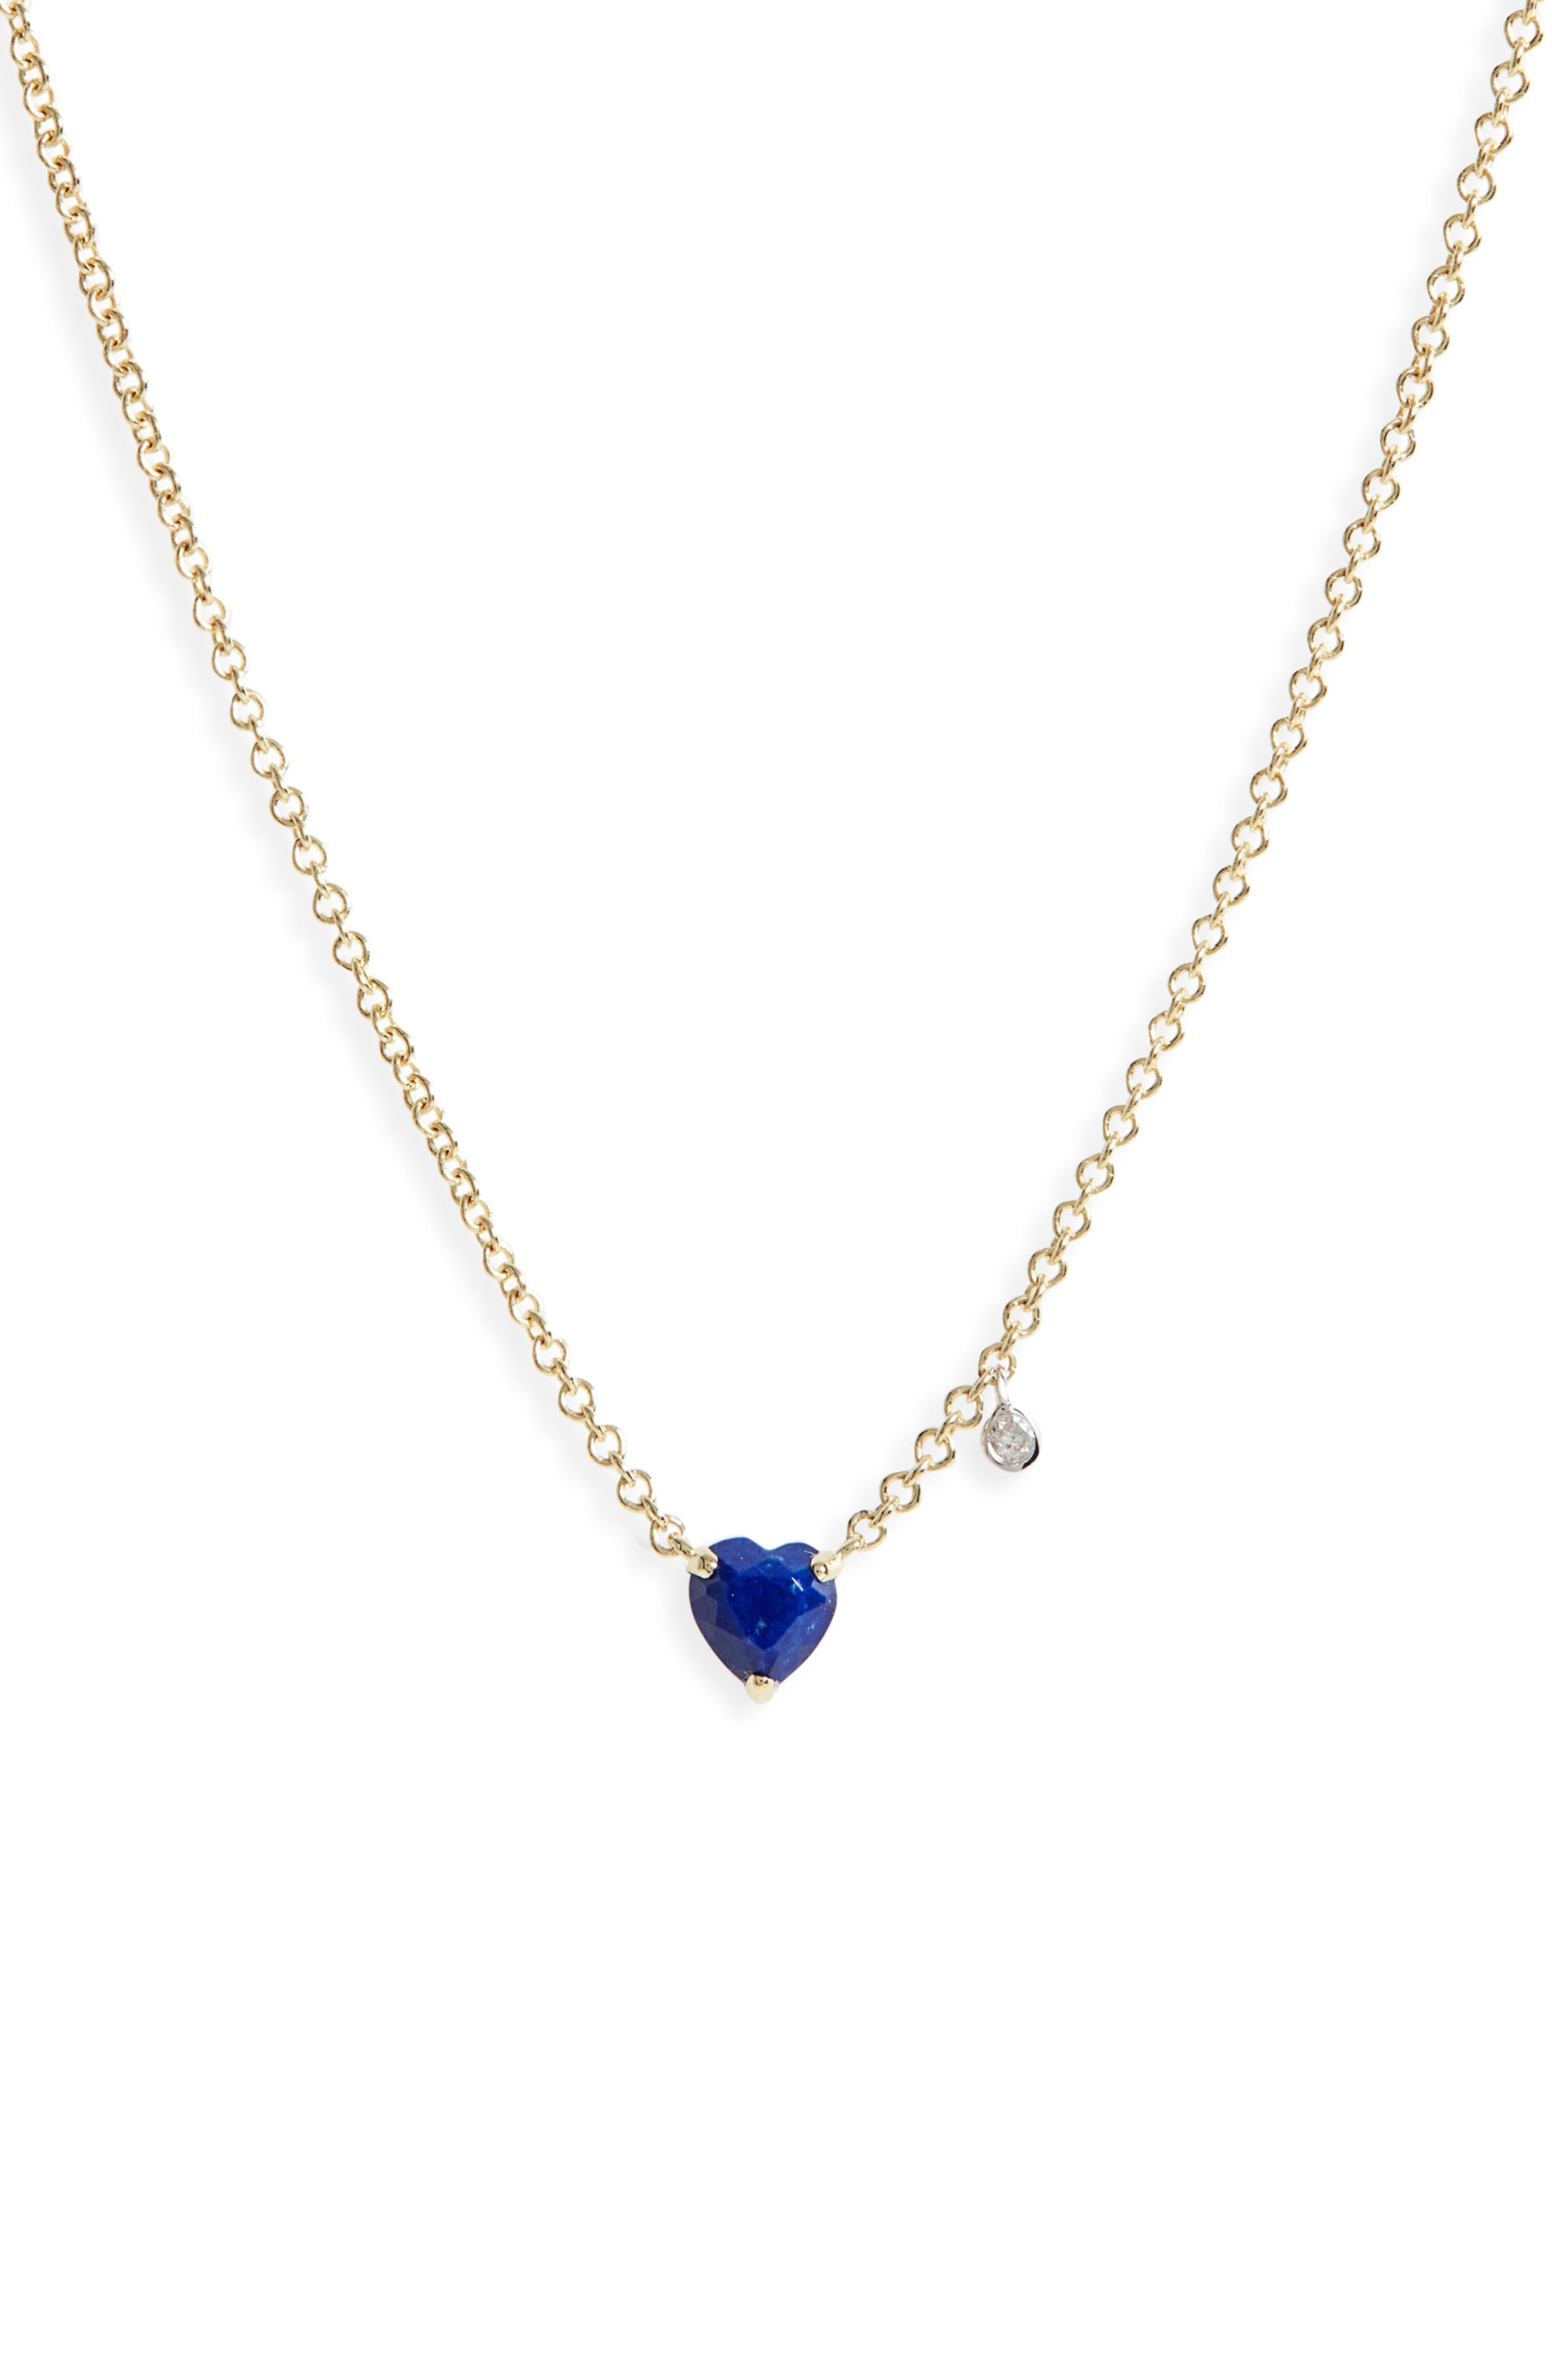 Gemstone Bar Necklace in Lapis and Gold is Graphic Delicate Modern